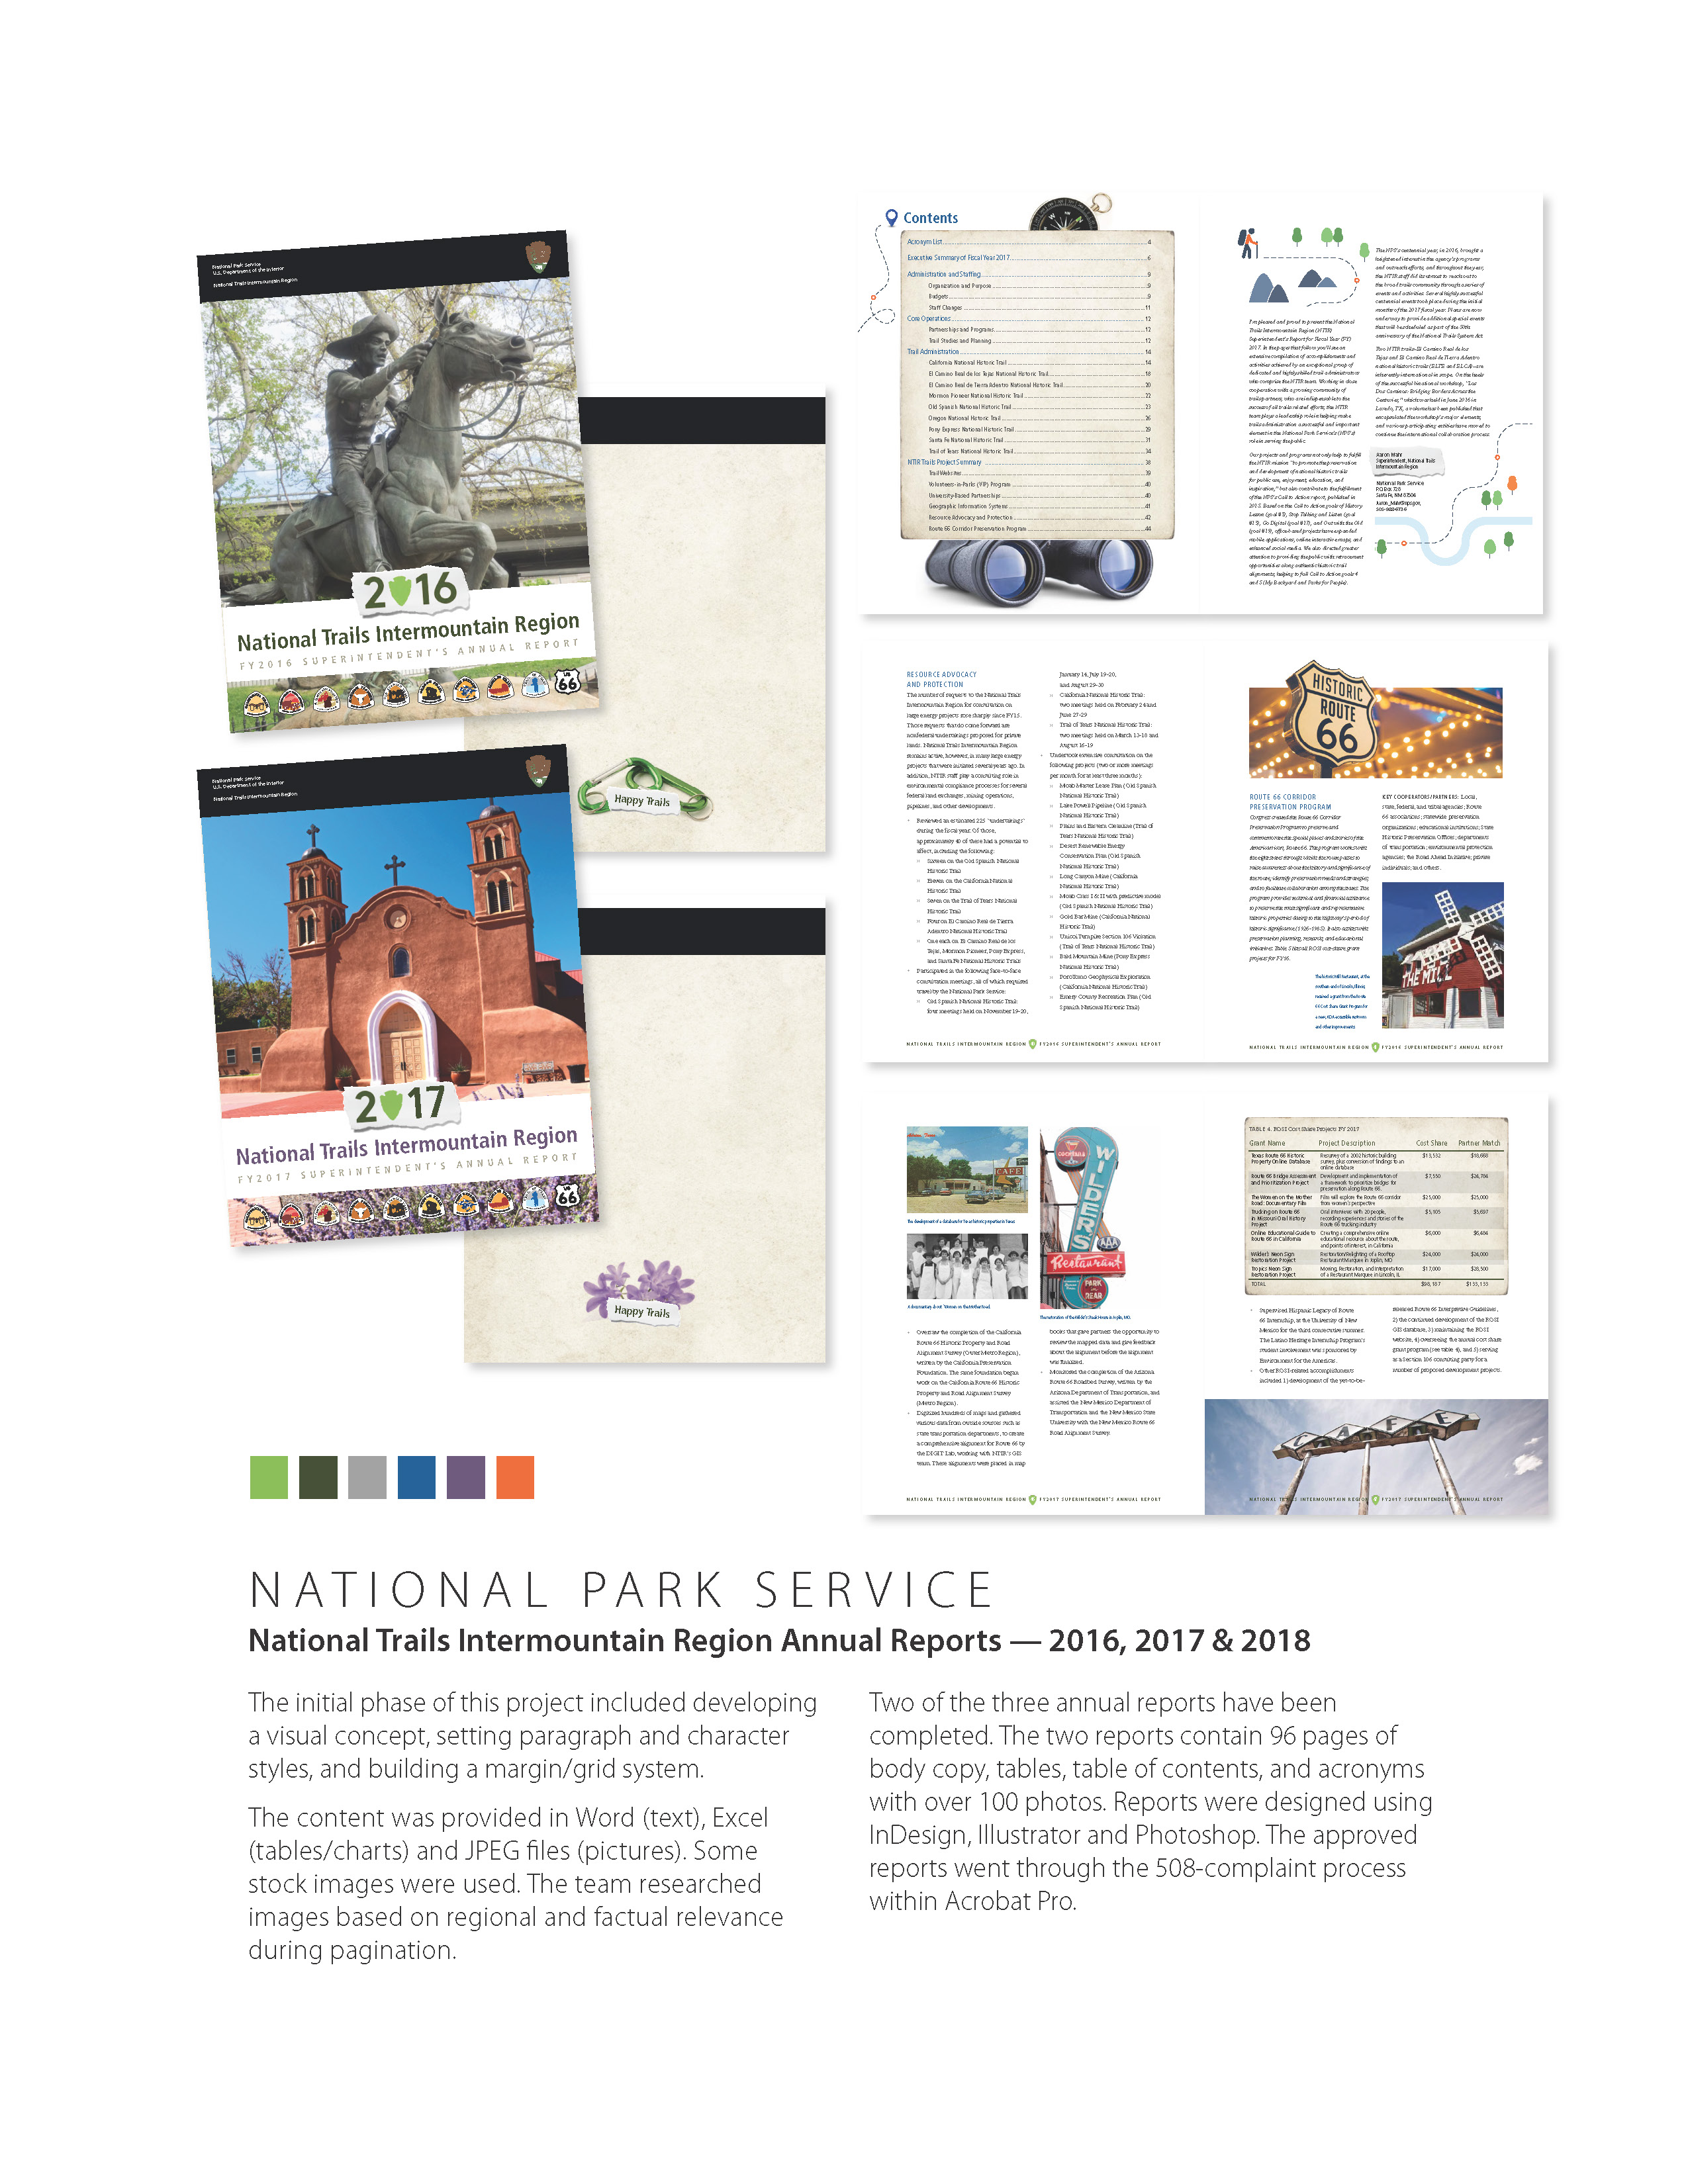 Image of National Park Service Annual Report Design and Layout